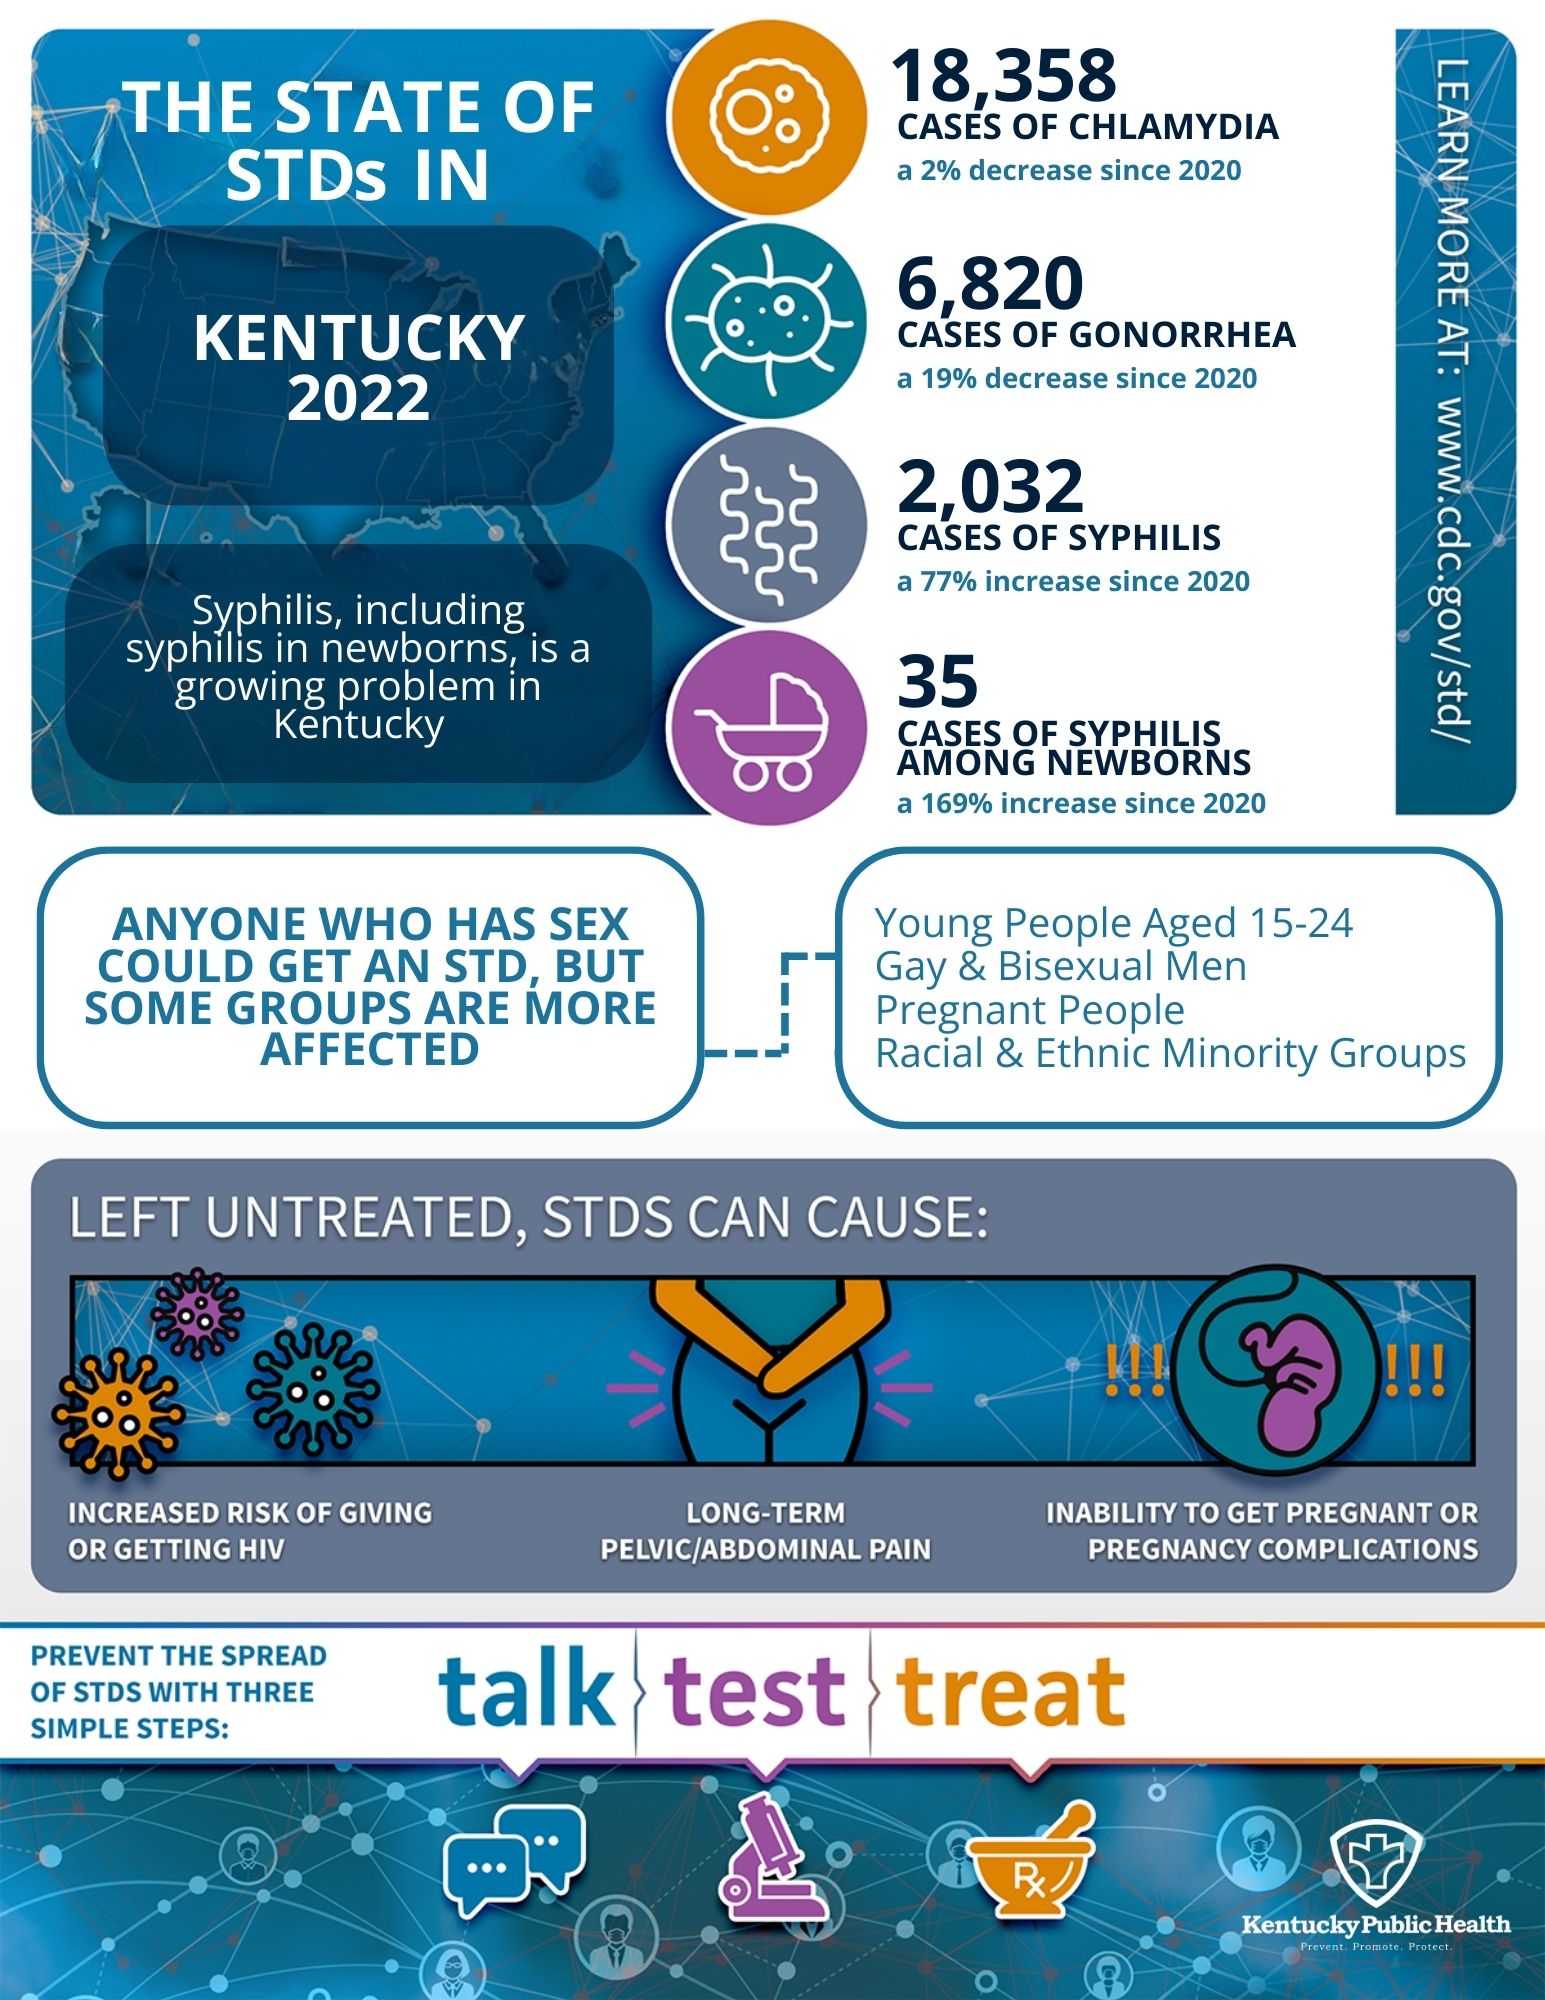 Blue and white graphic which shows number of cases of STD's in Kentucky.